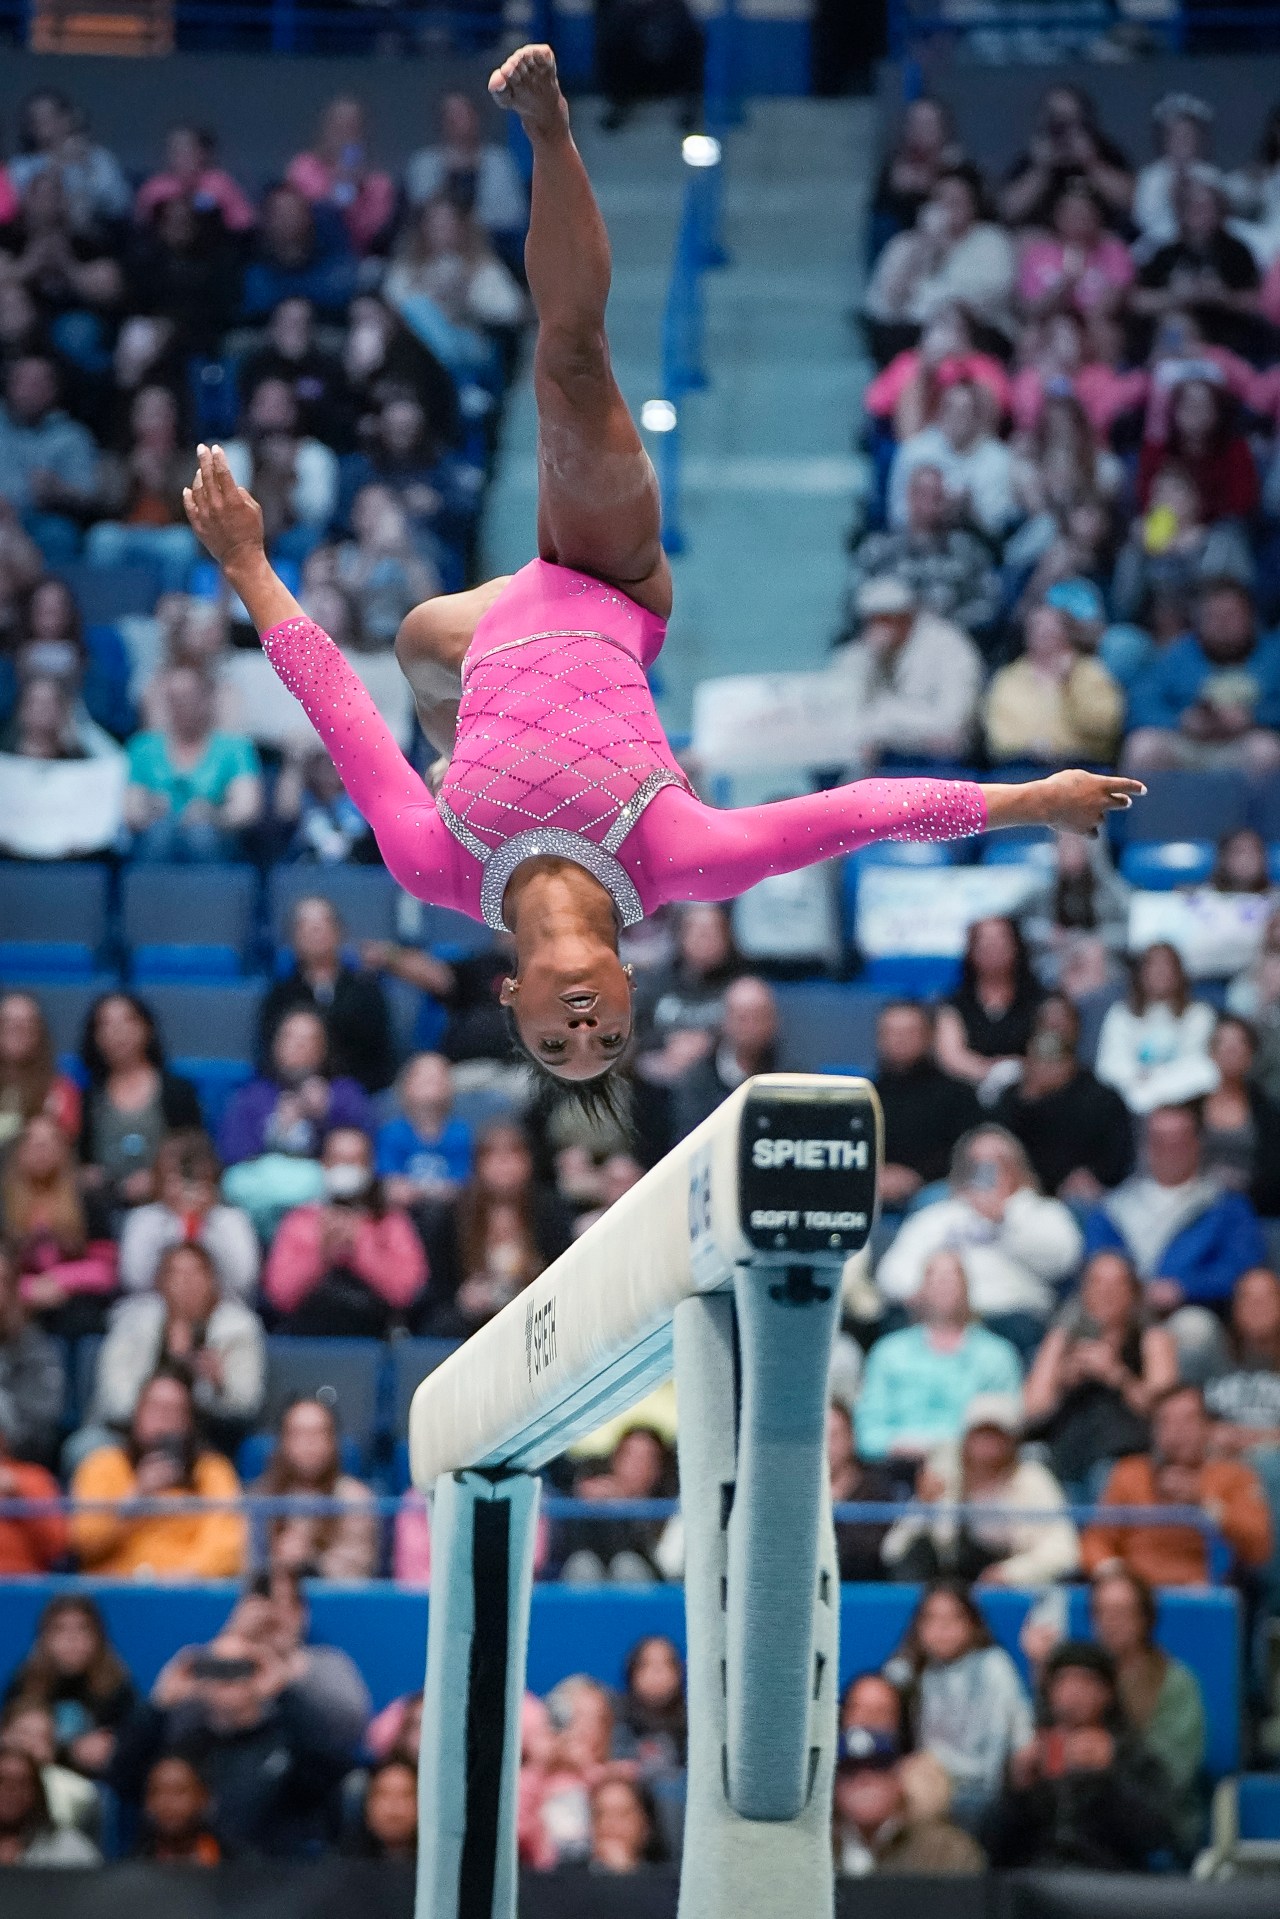 Simone Biles shines in return while Gabby Douglas scratches after a shaky start at the U.S. Classic | KLRT [Video]